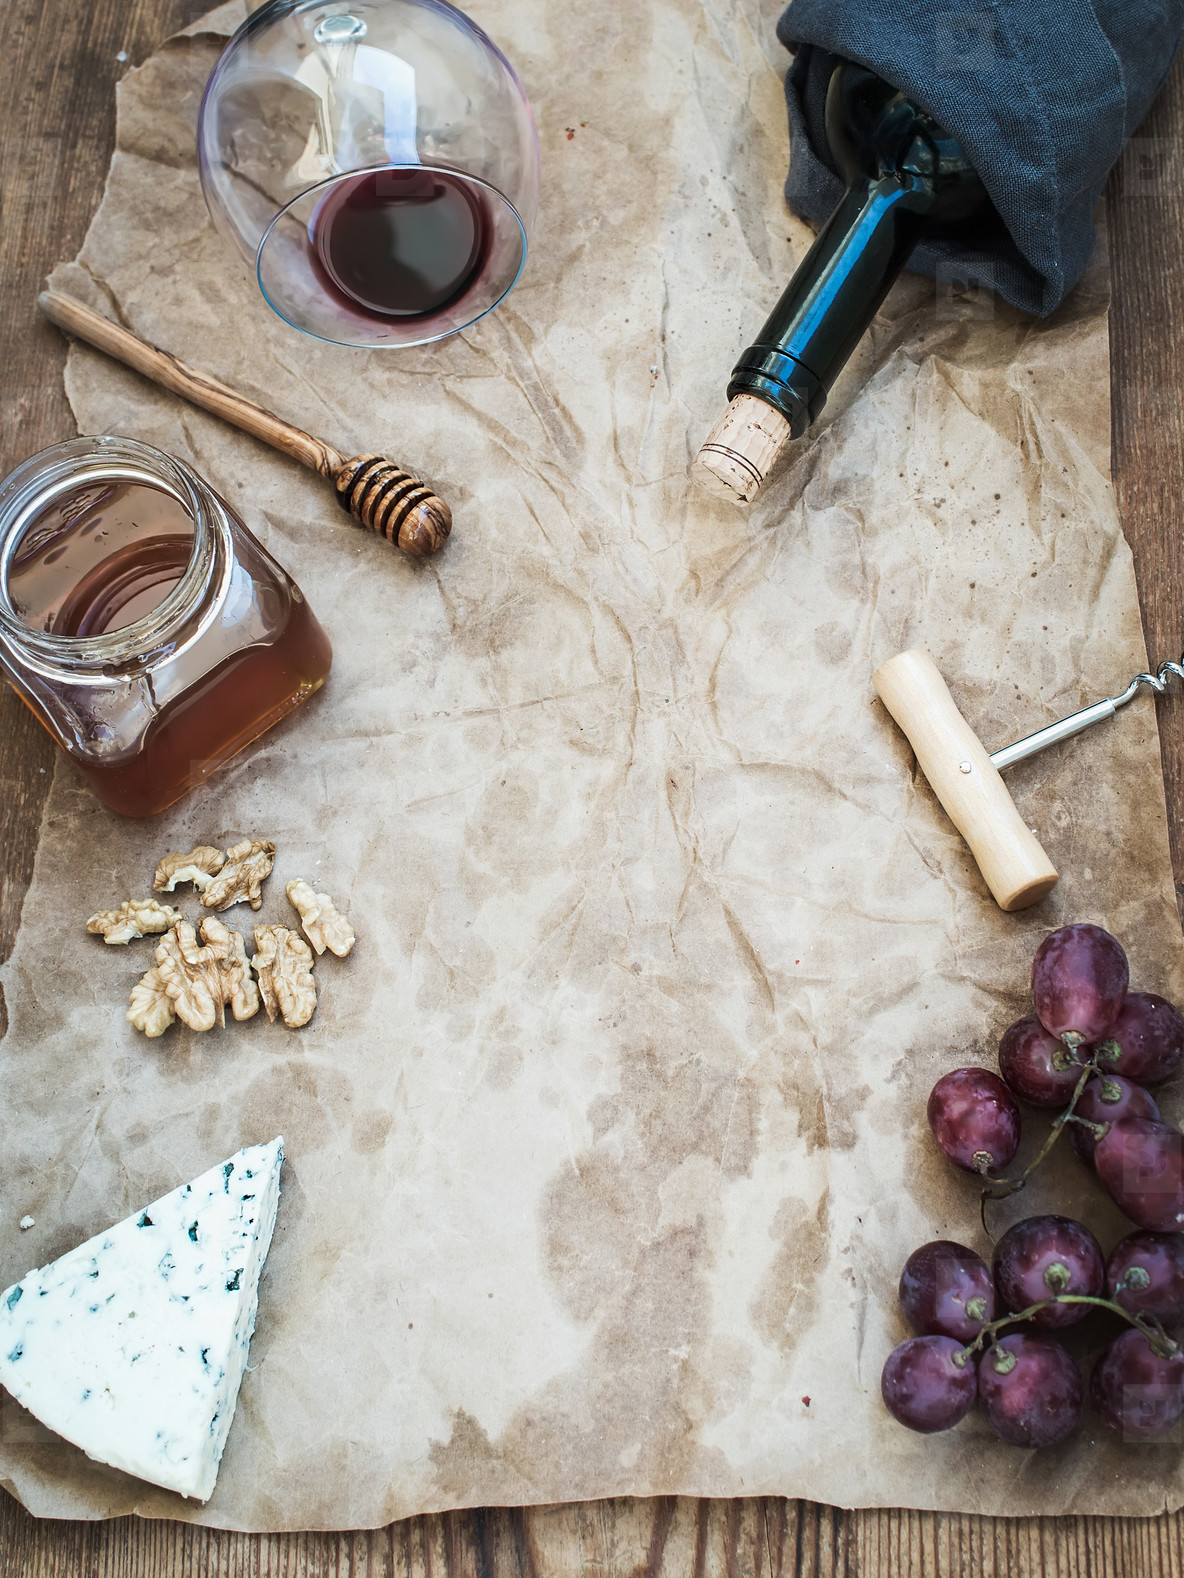 Wine and appetizer set with copy space in center. Glass of red wine, bottle, corkscrewer, blue cheese, grapes, honey, walnuts on oily craft paper over rustic wooden table, top view.